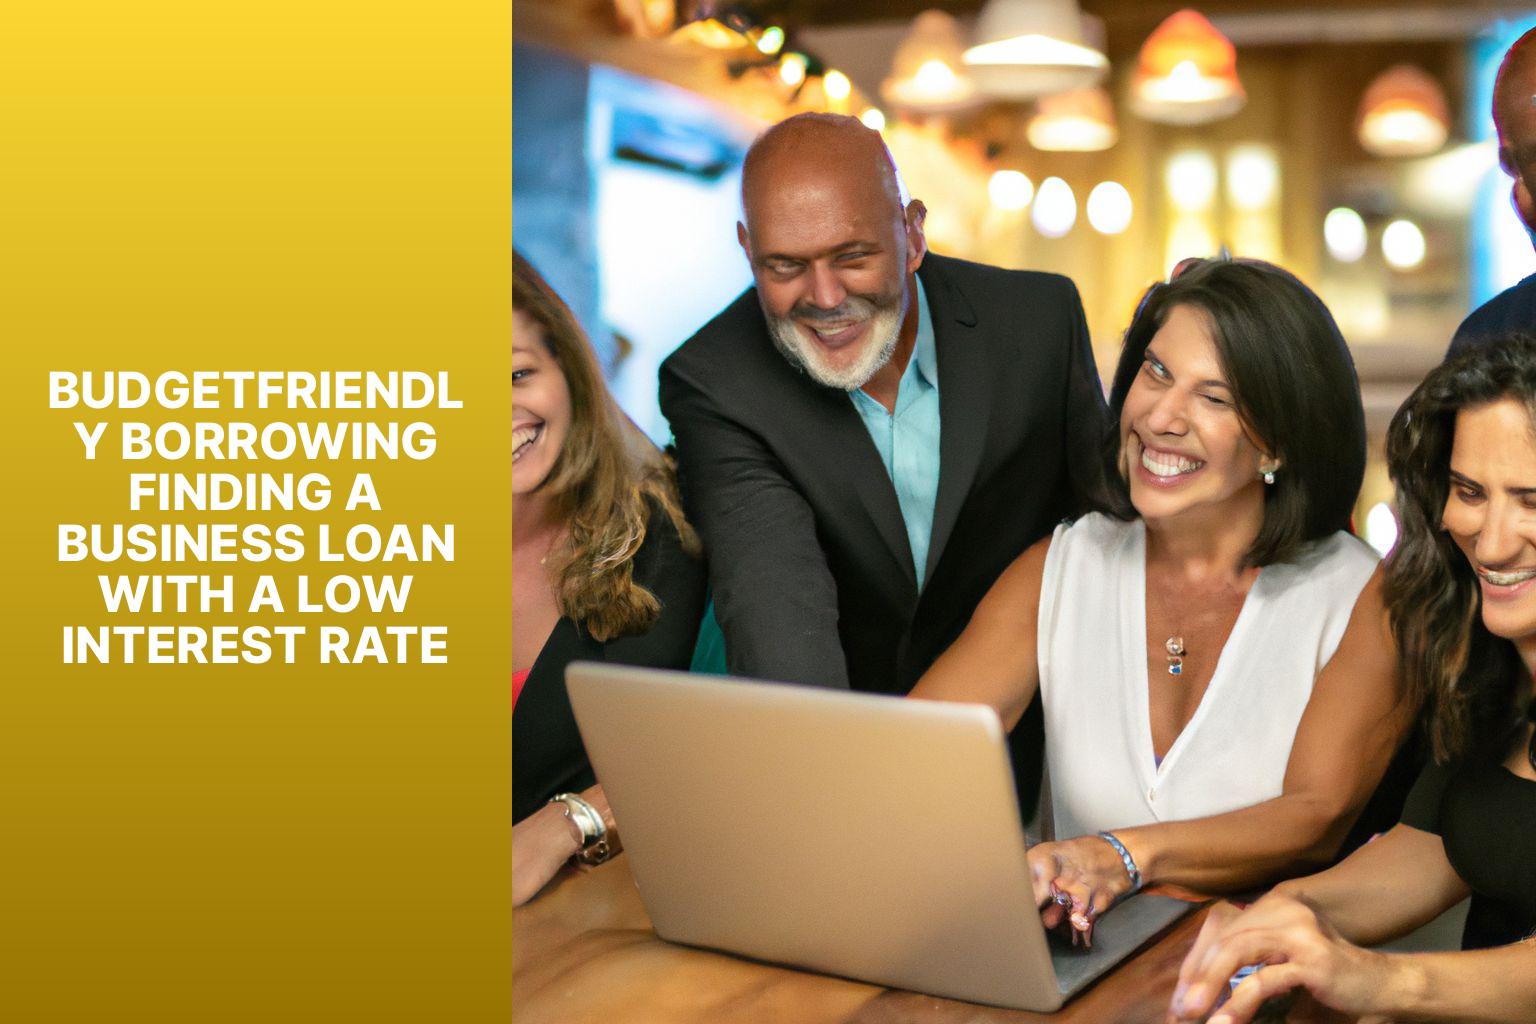 BudgetFriendly Borrowing Finding a Business Loan with a Low Interest Rate